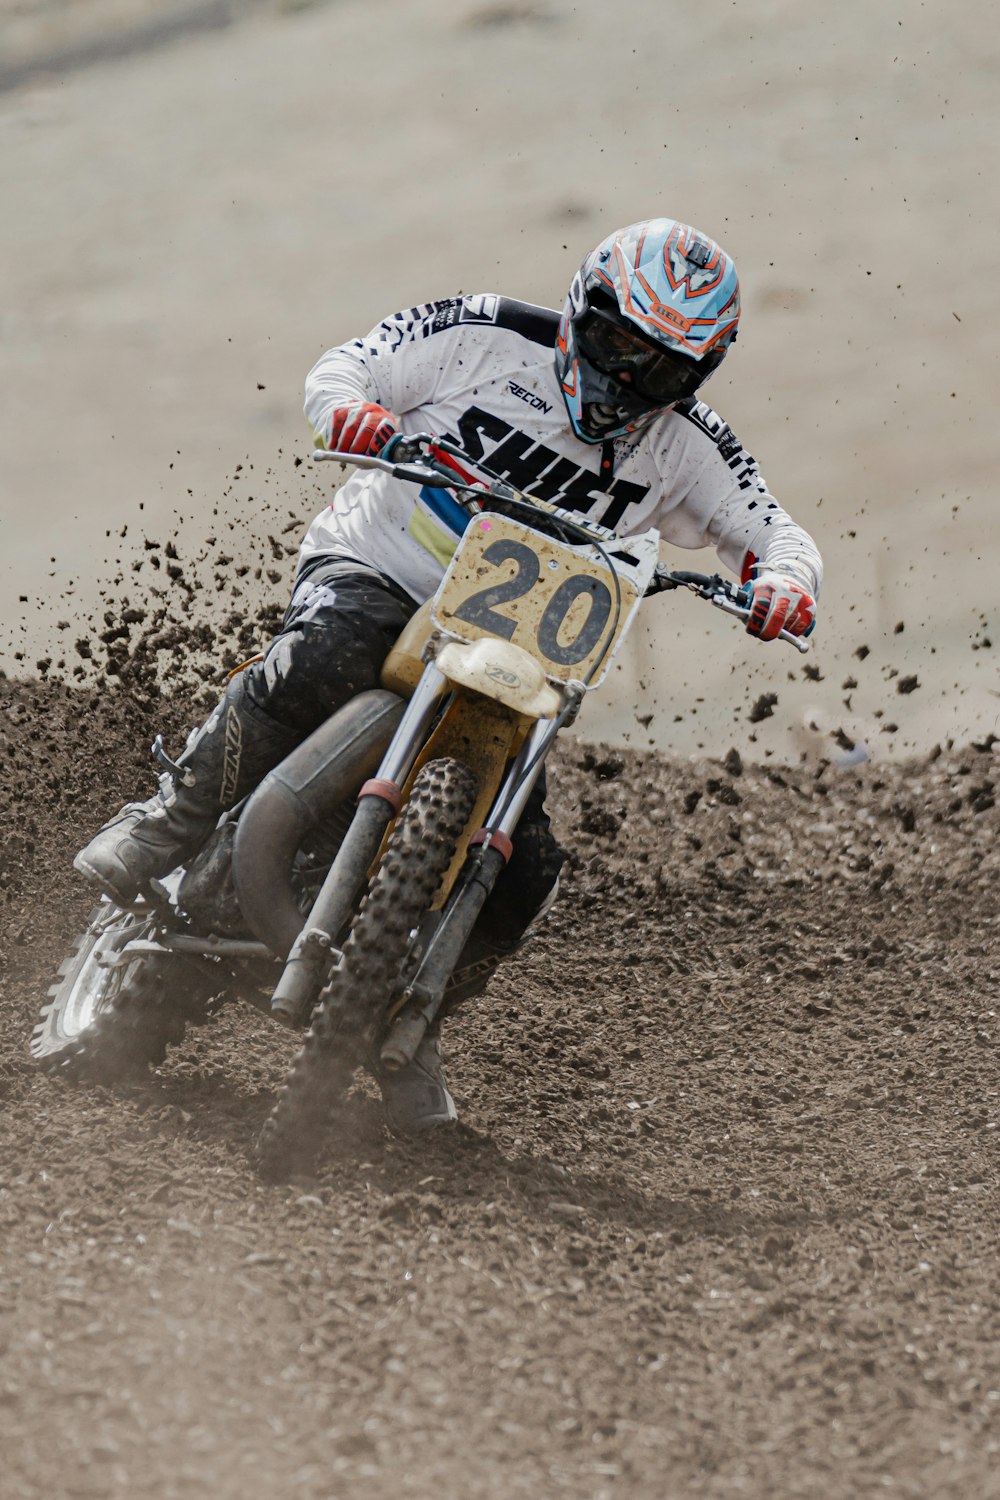 man in black and white racing suit riding on motocross dirt bike